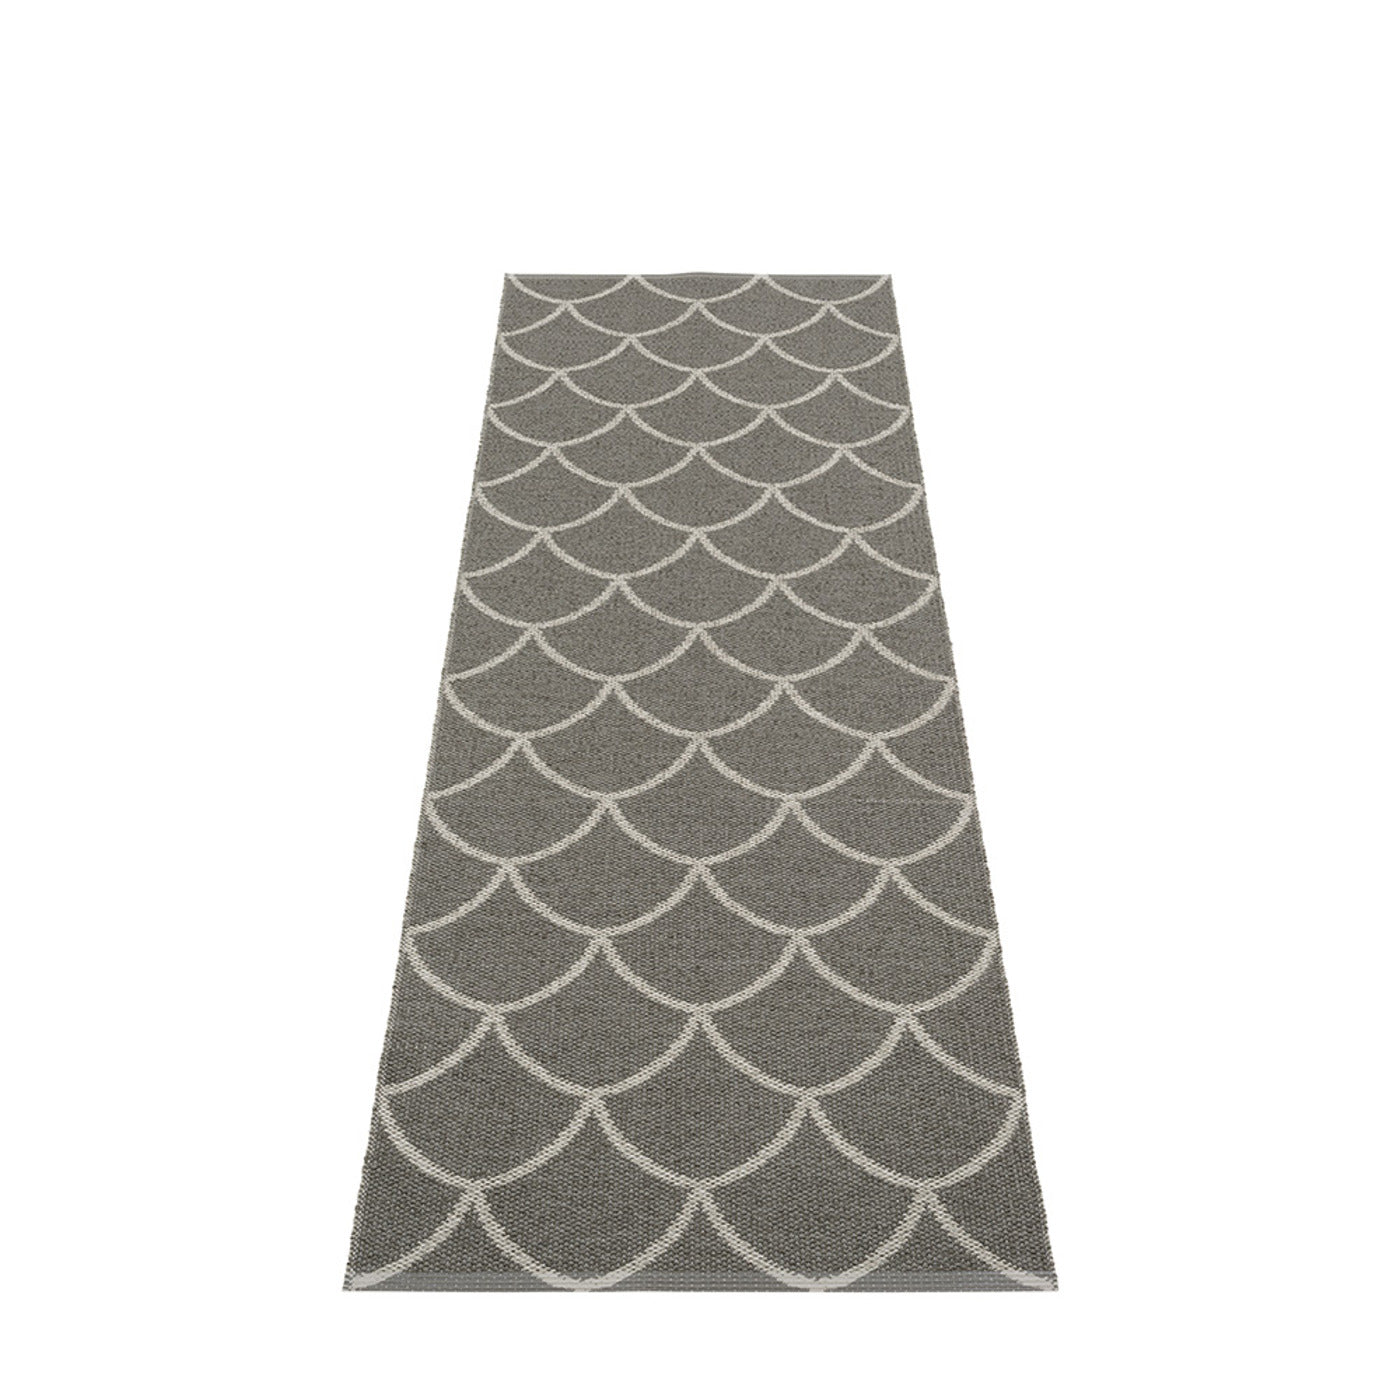 All sizes KOTTE RUG - Charcoal / Warm Grey